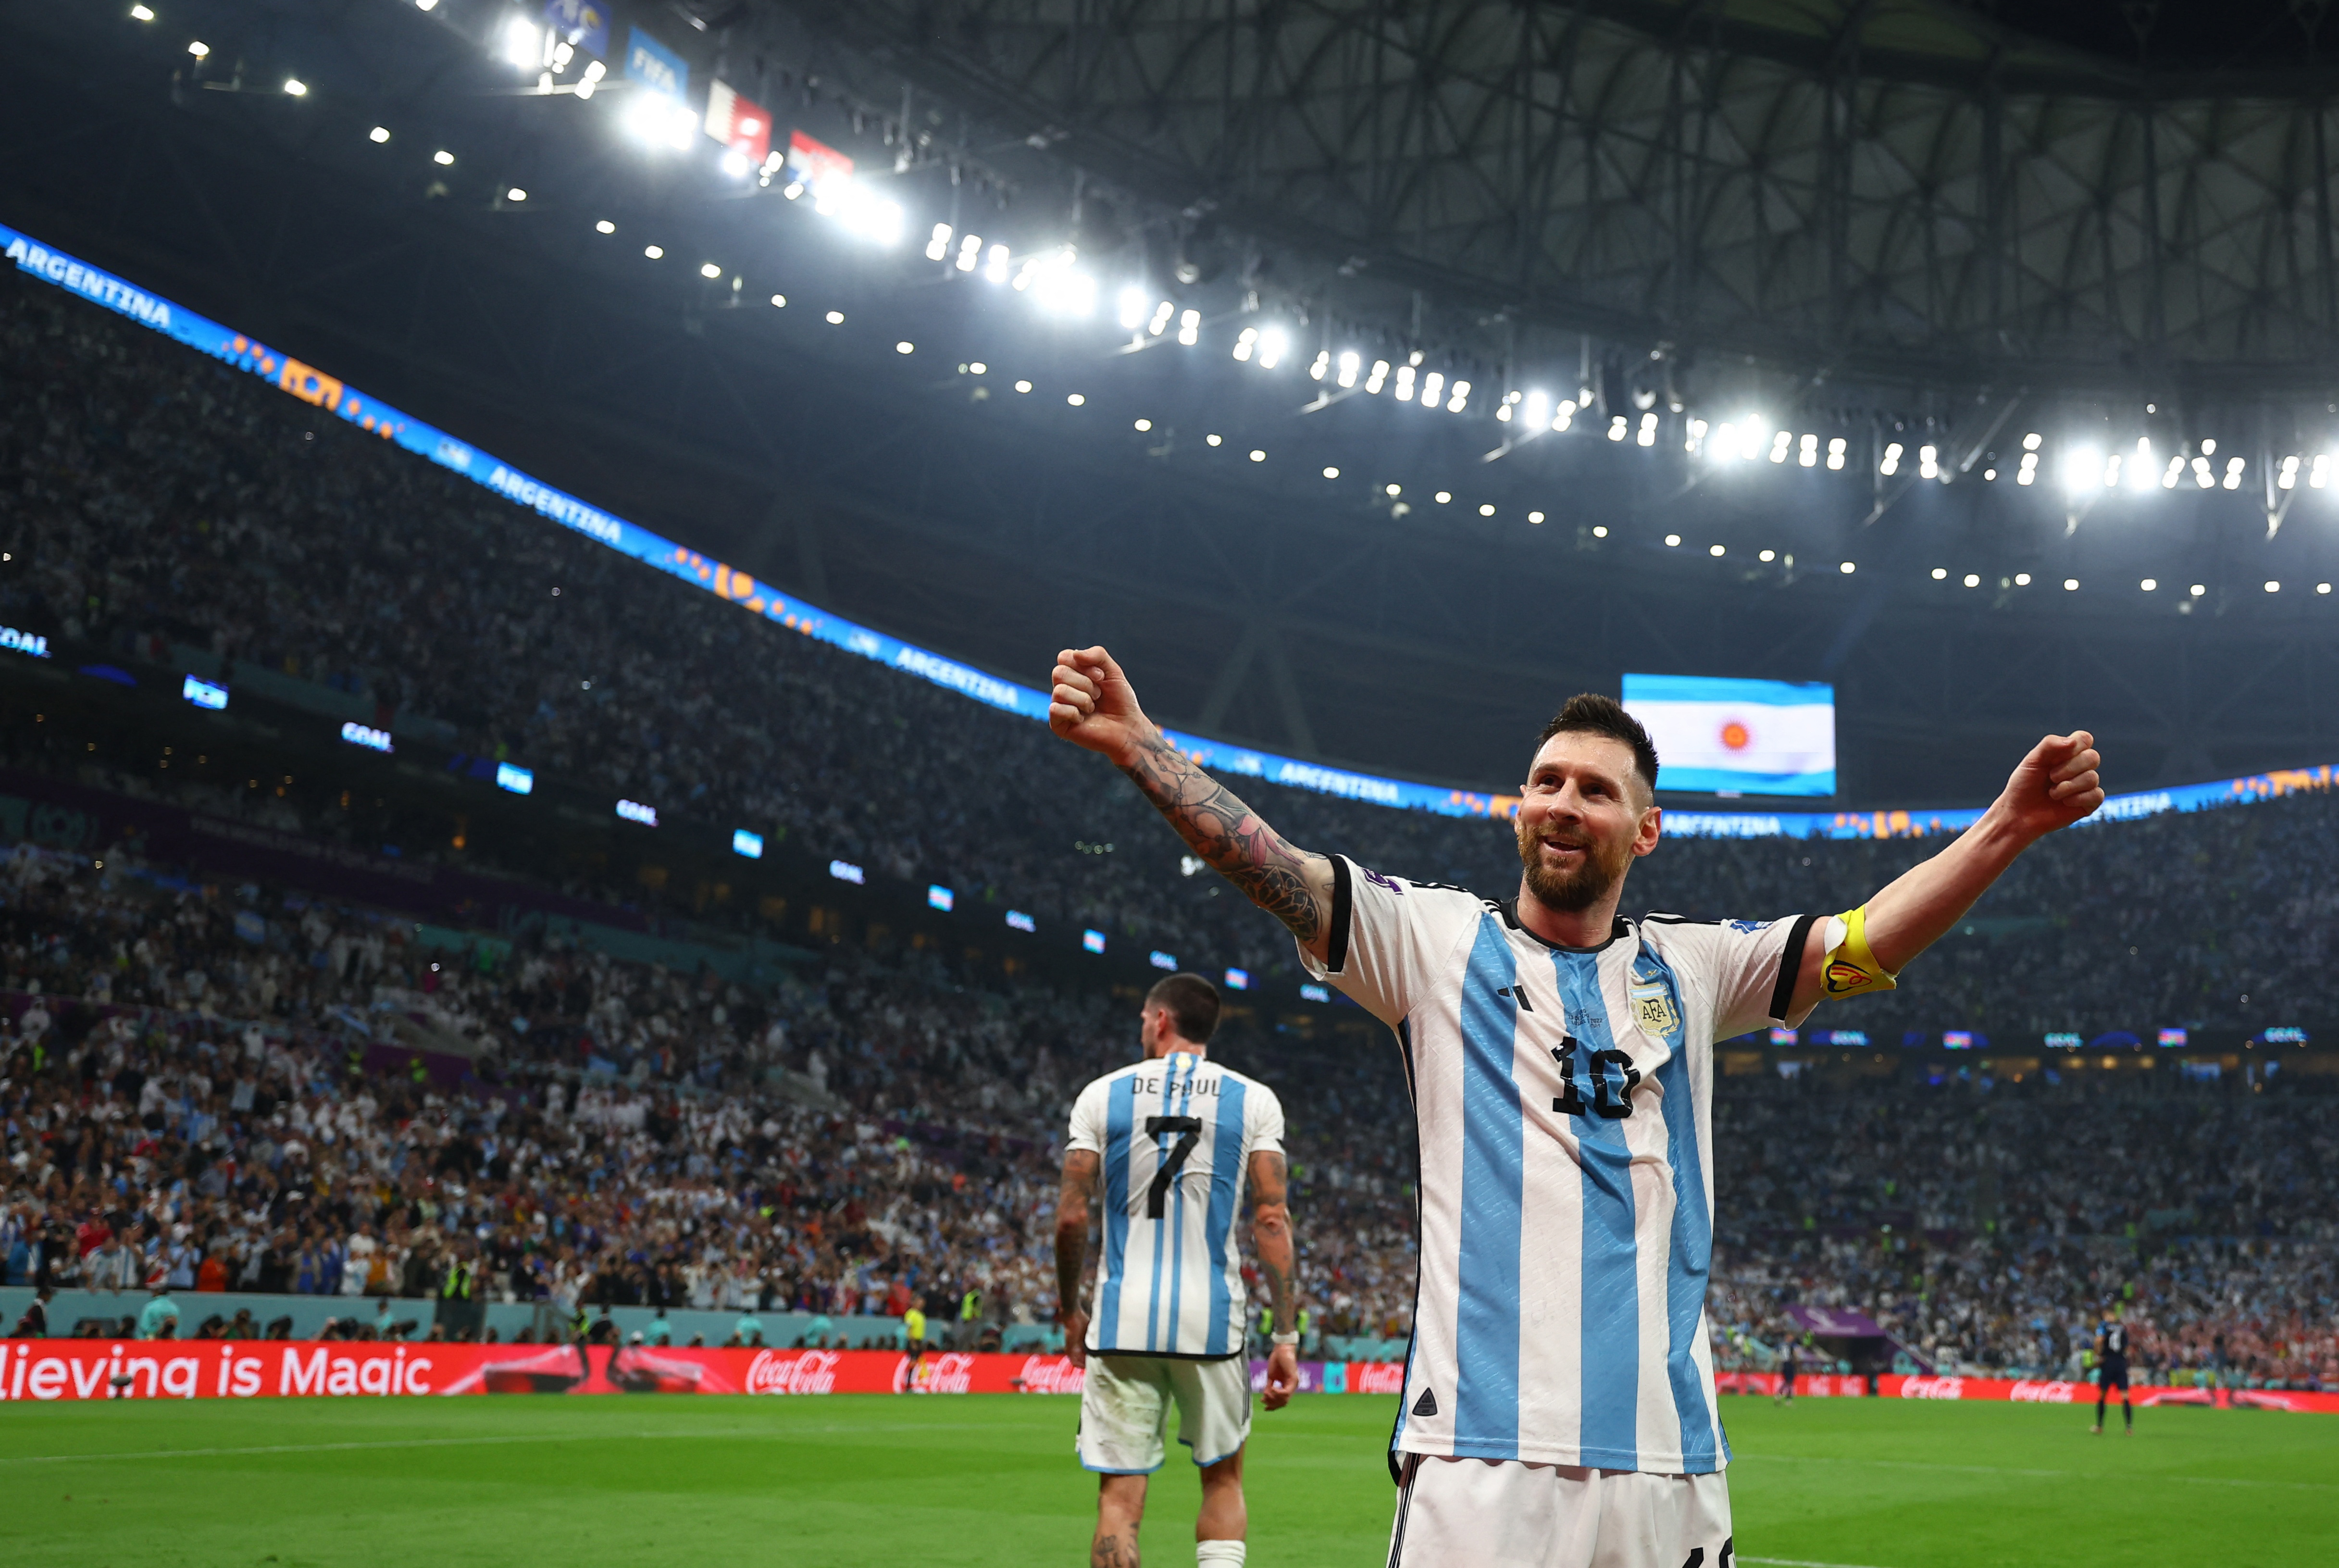 Argentina's Lionel Messi: World Cup and career | Reuters